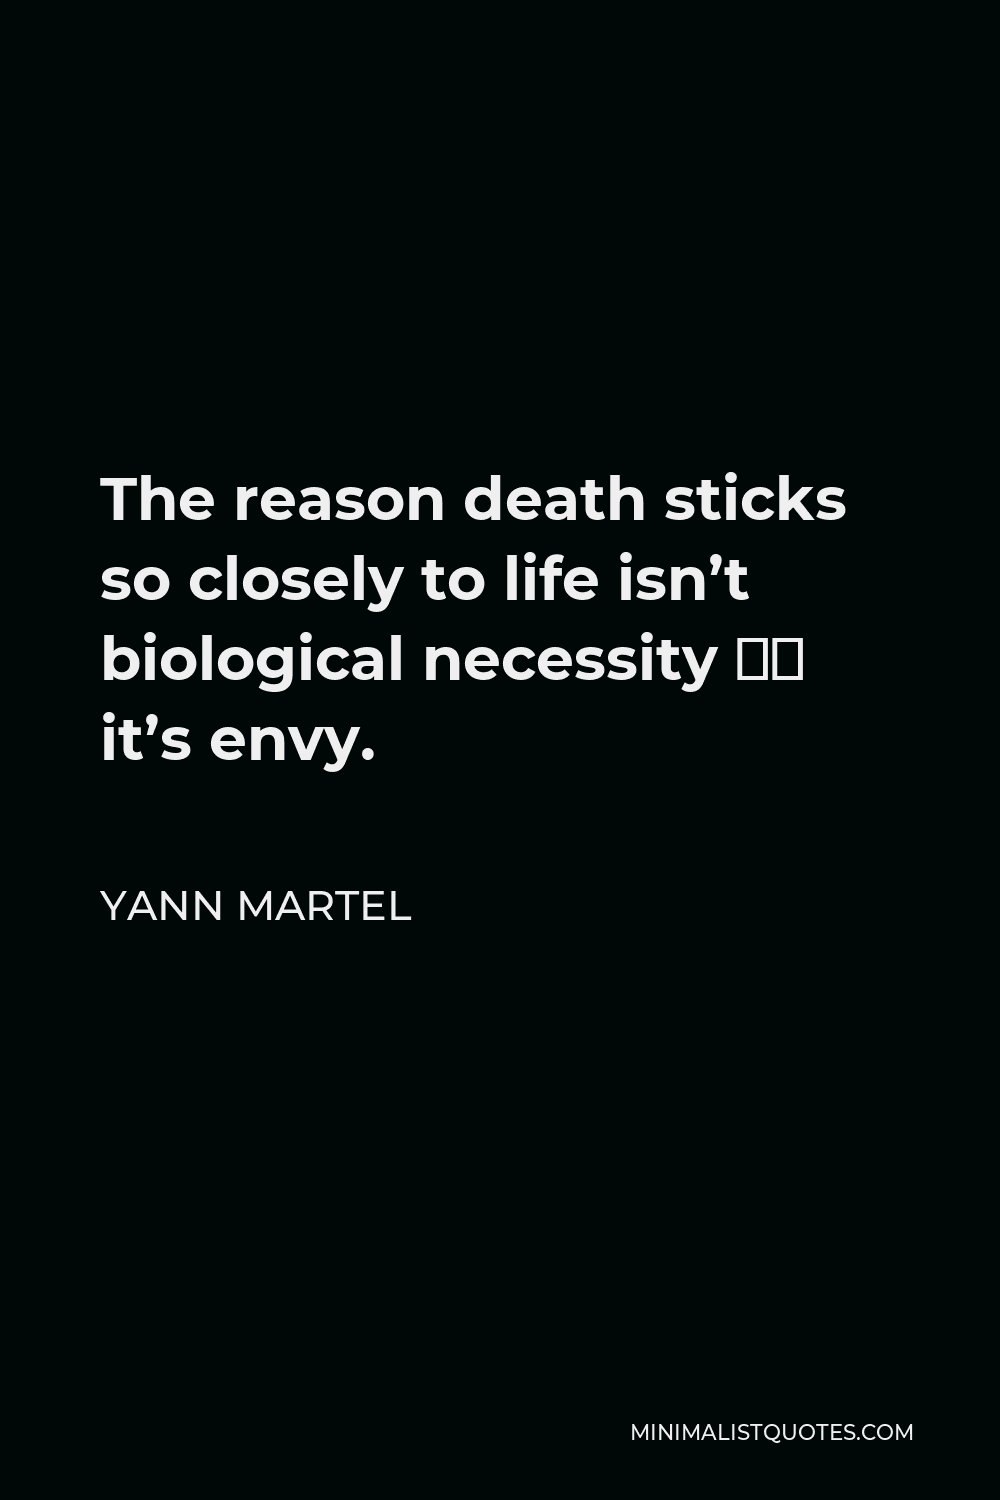 Yann Martel Quote - The reason death sticks so closely to life isn’t biological necessity – it’s envy.